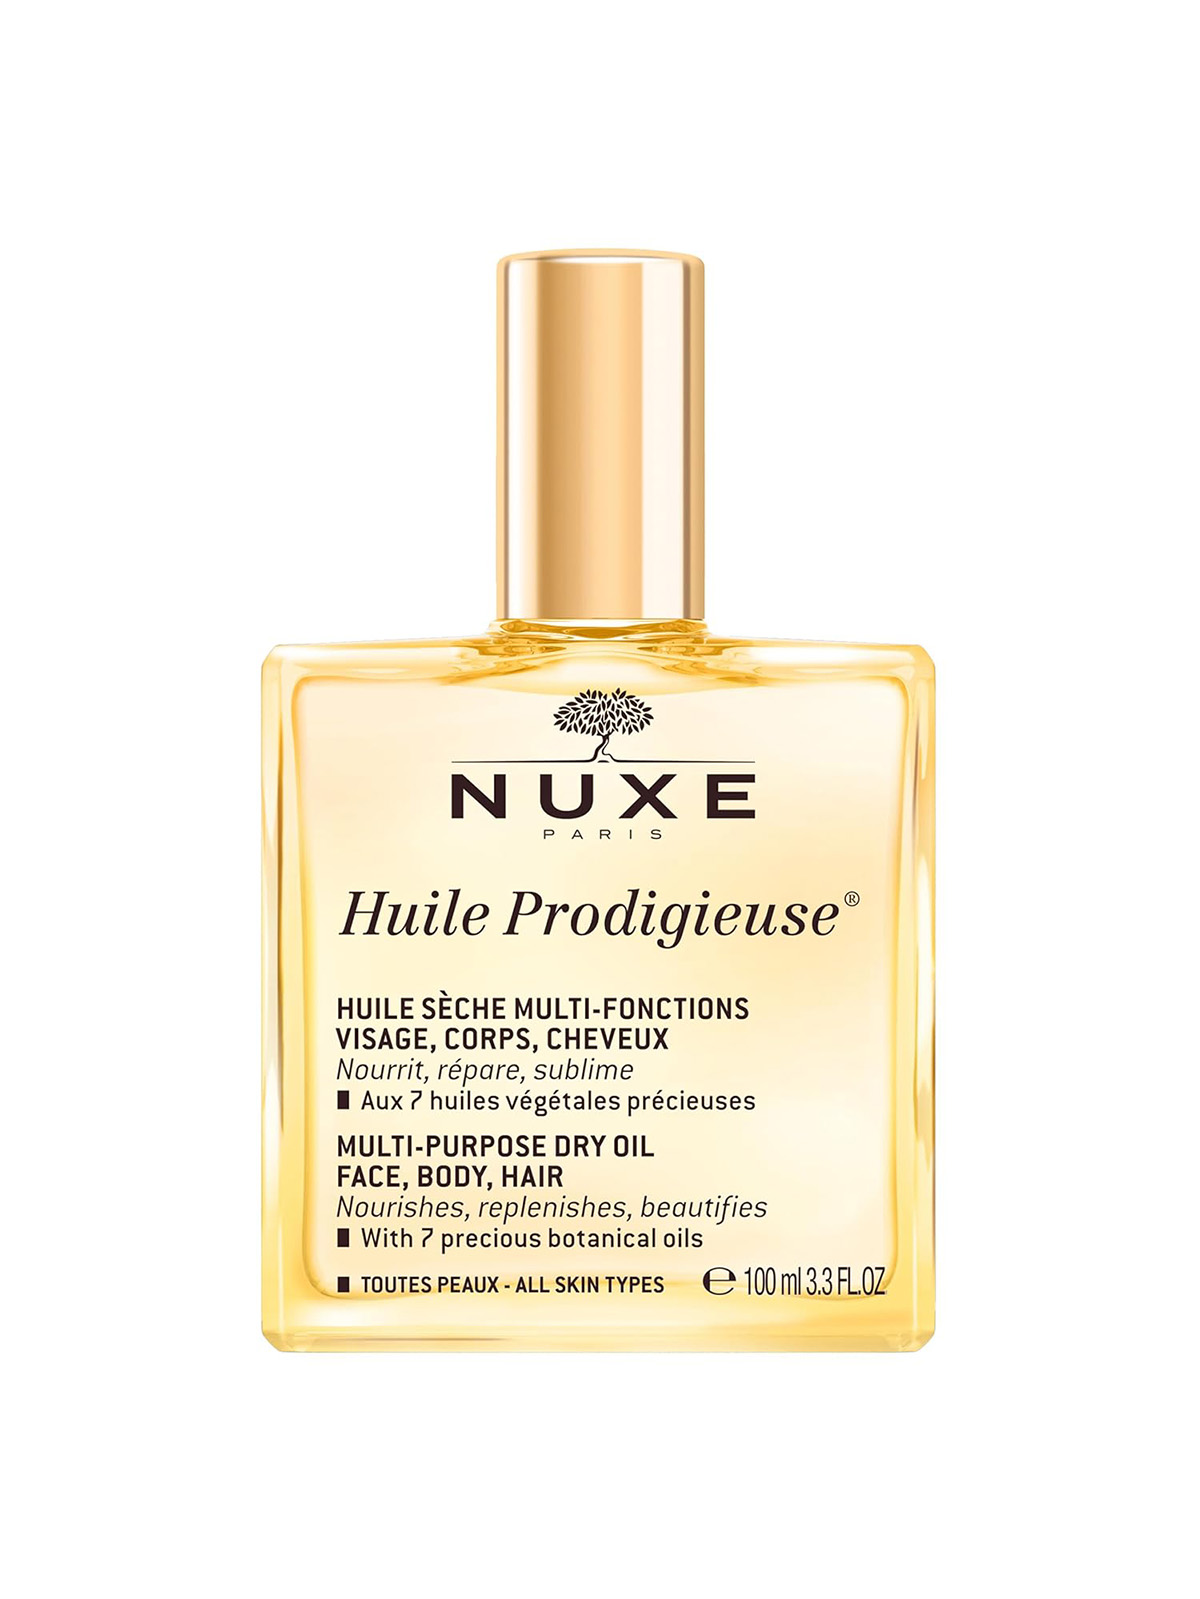 Nuxe Huile Prodigieuse Multi-Purpose Dry Oil - Radiant Glow and Lightweight Hydration for Face, Body & Hair. Nourishes, Repairs and Enhances